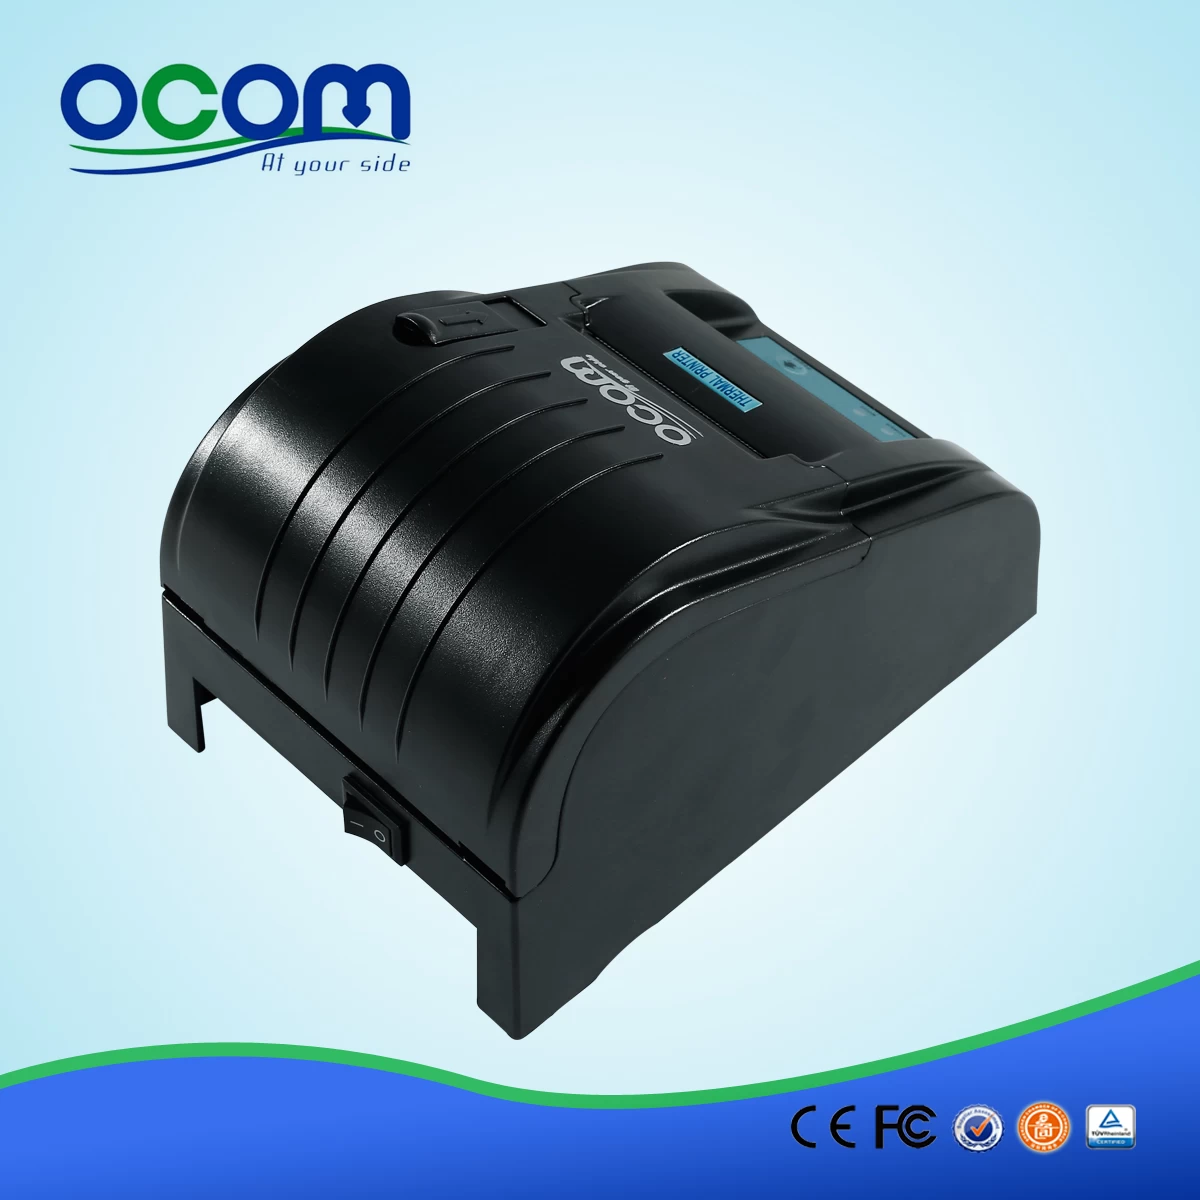 Lowest Priced 58mm Android Thermal Receipt Printer--OCPP-585